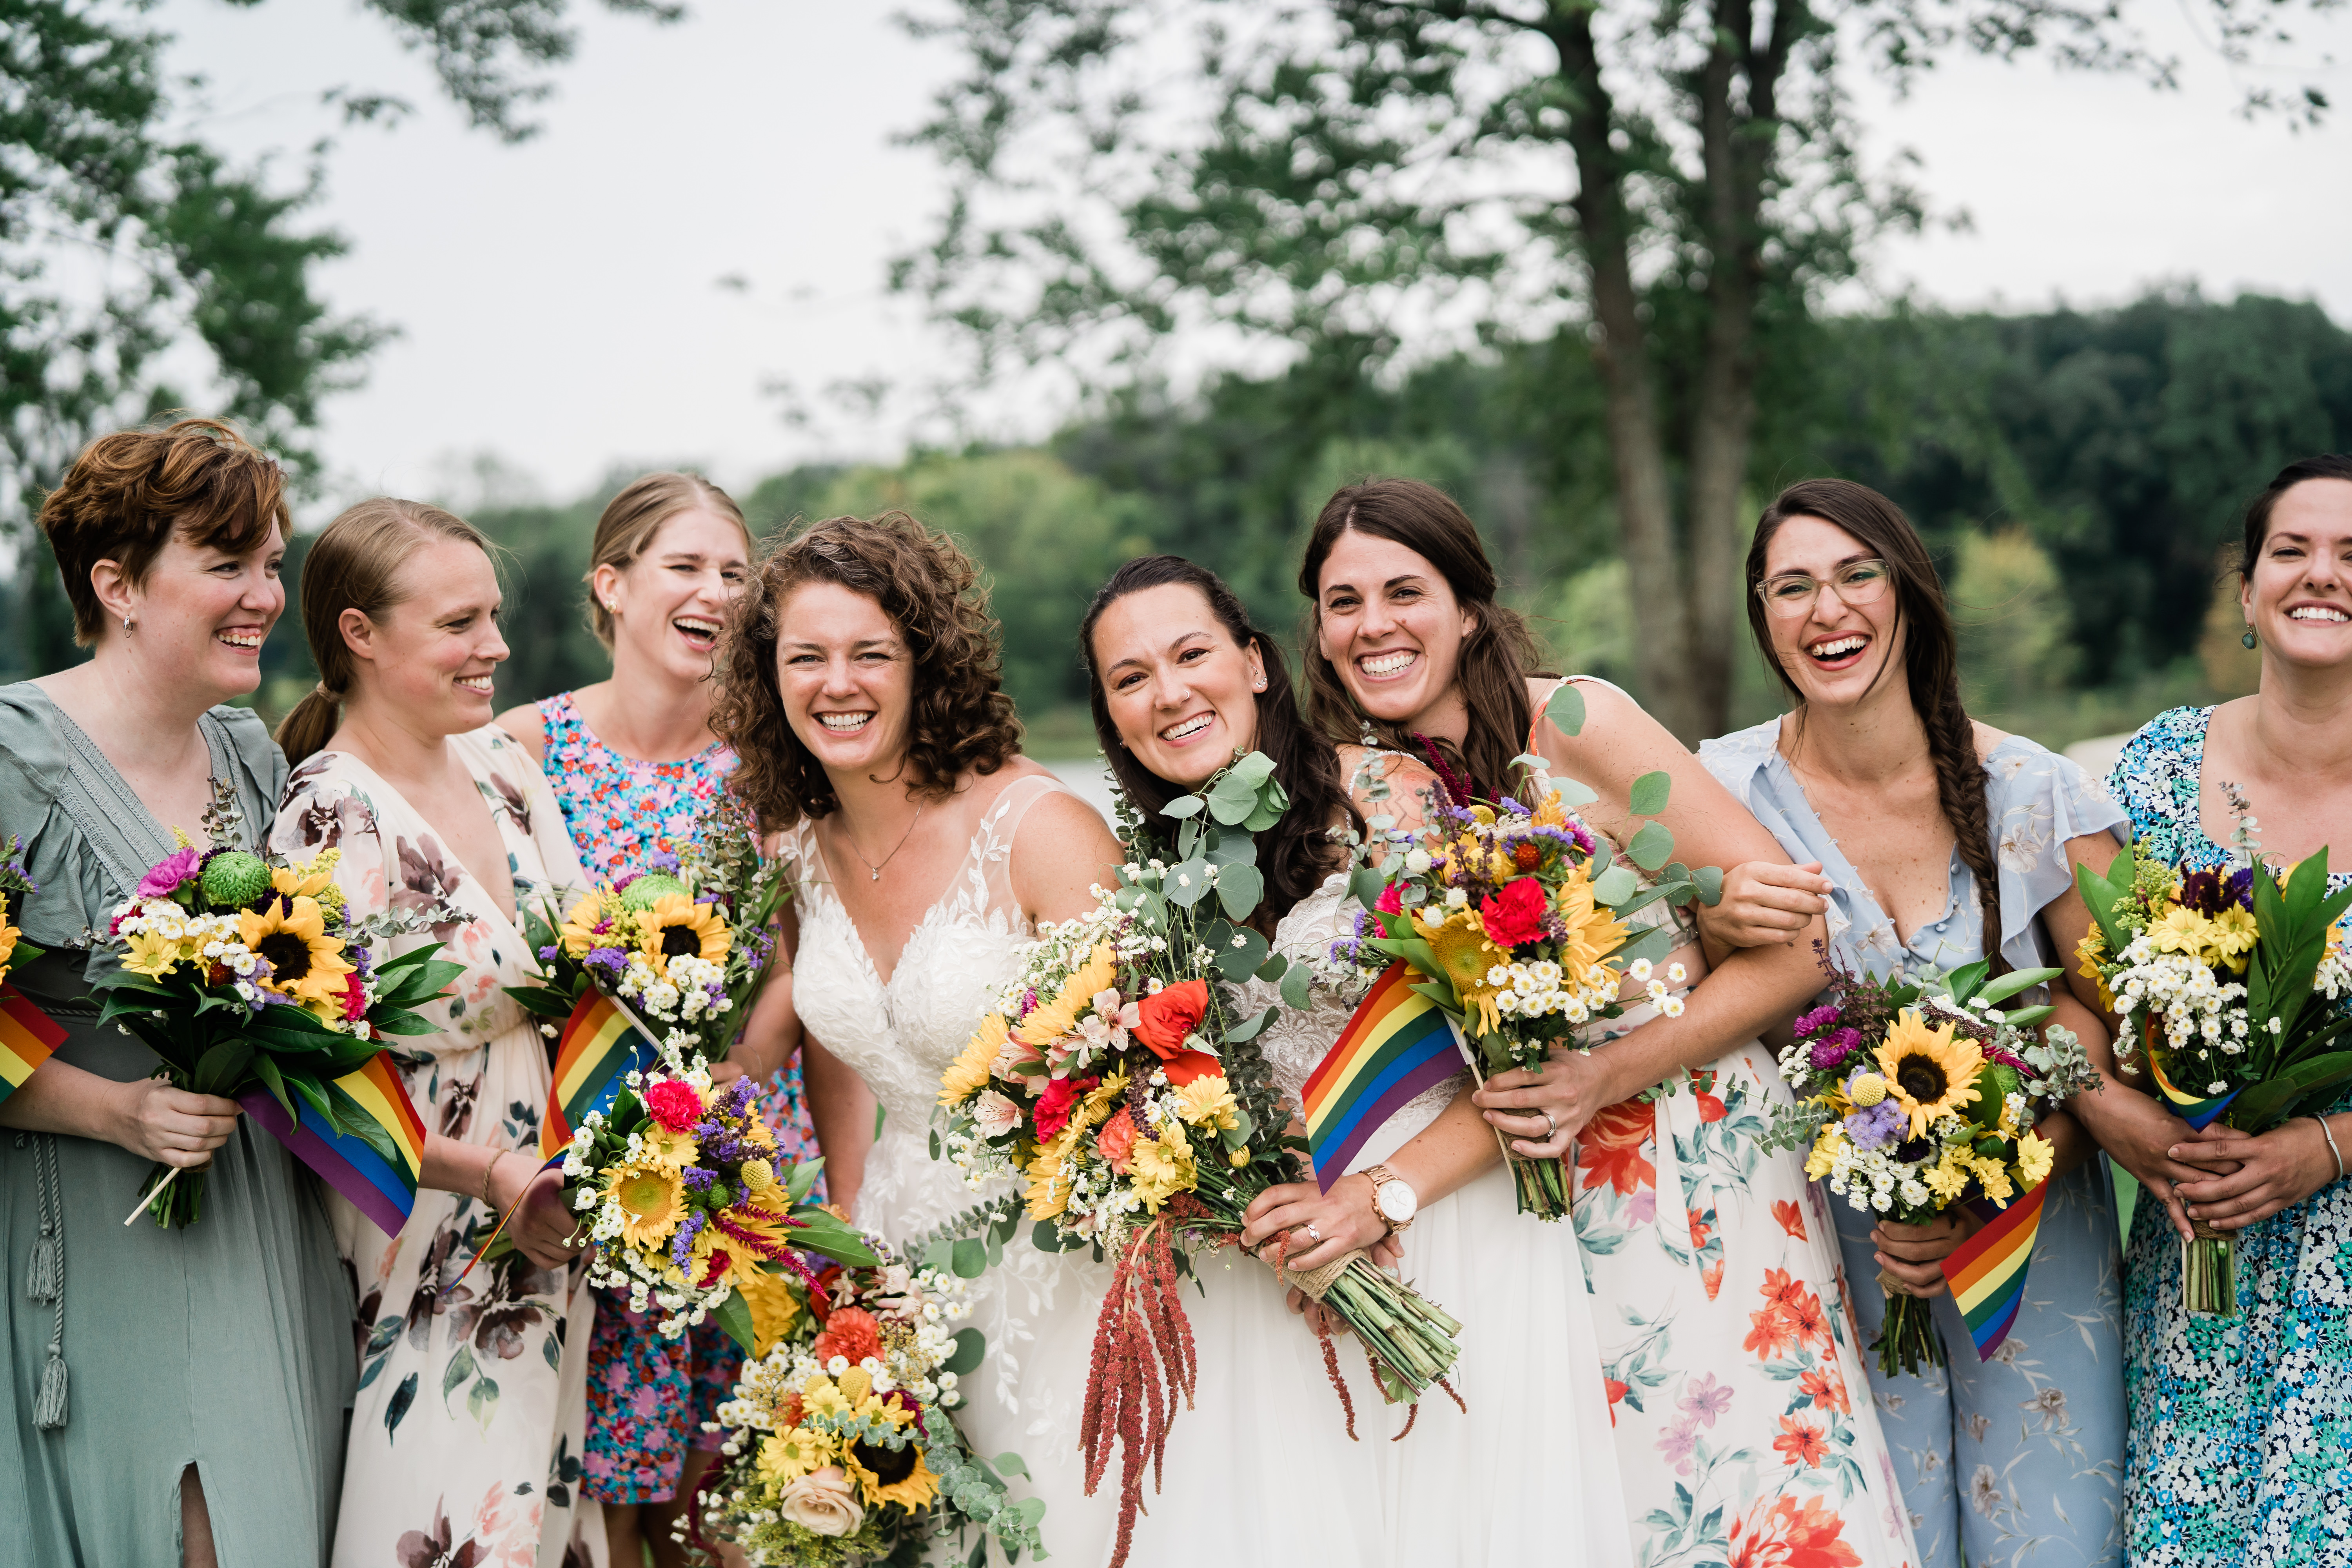 brides laughing and celebrating with wedding party